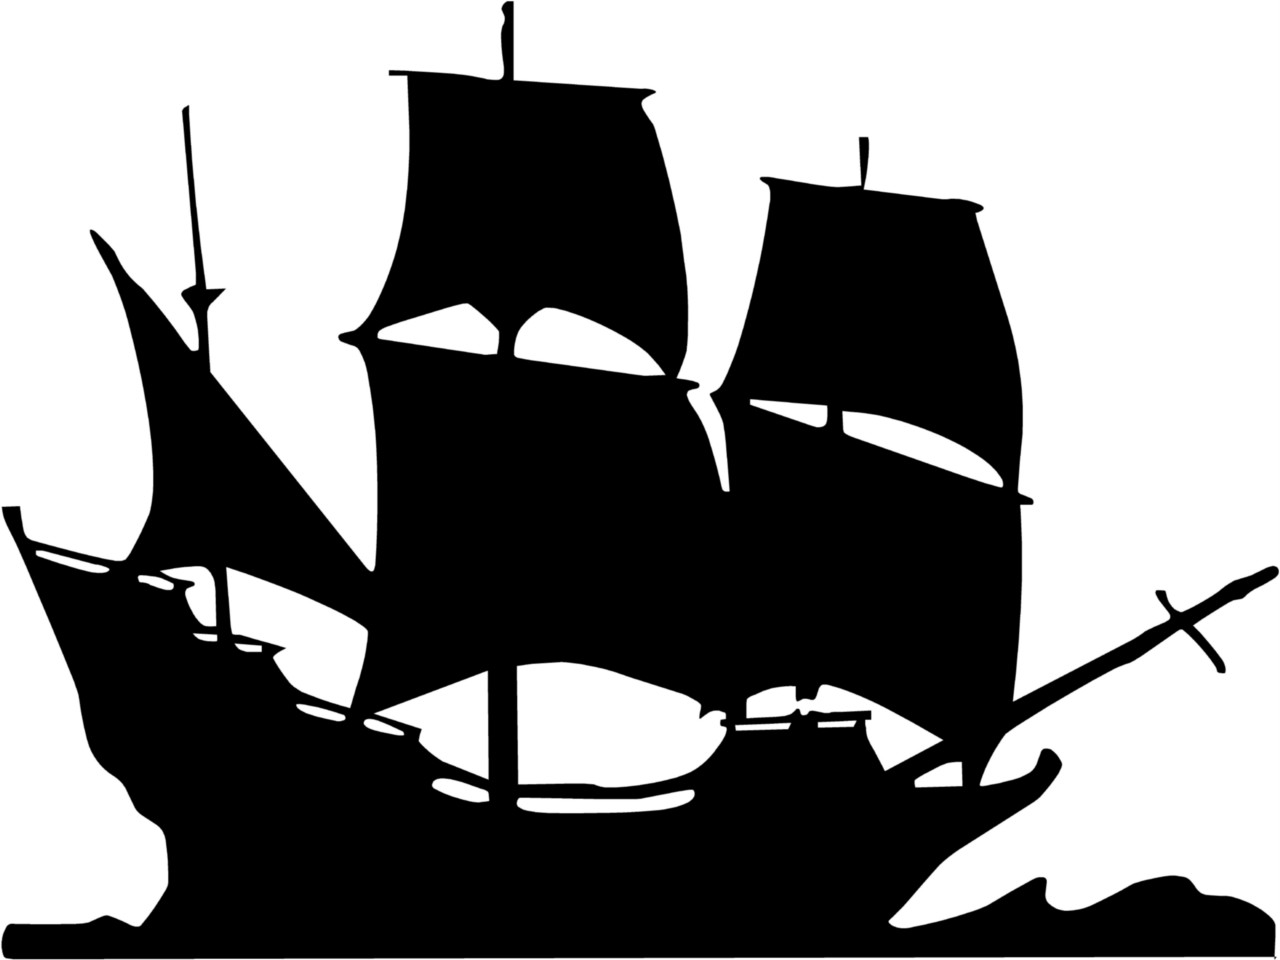 Pirate ship clipart black and